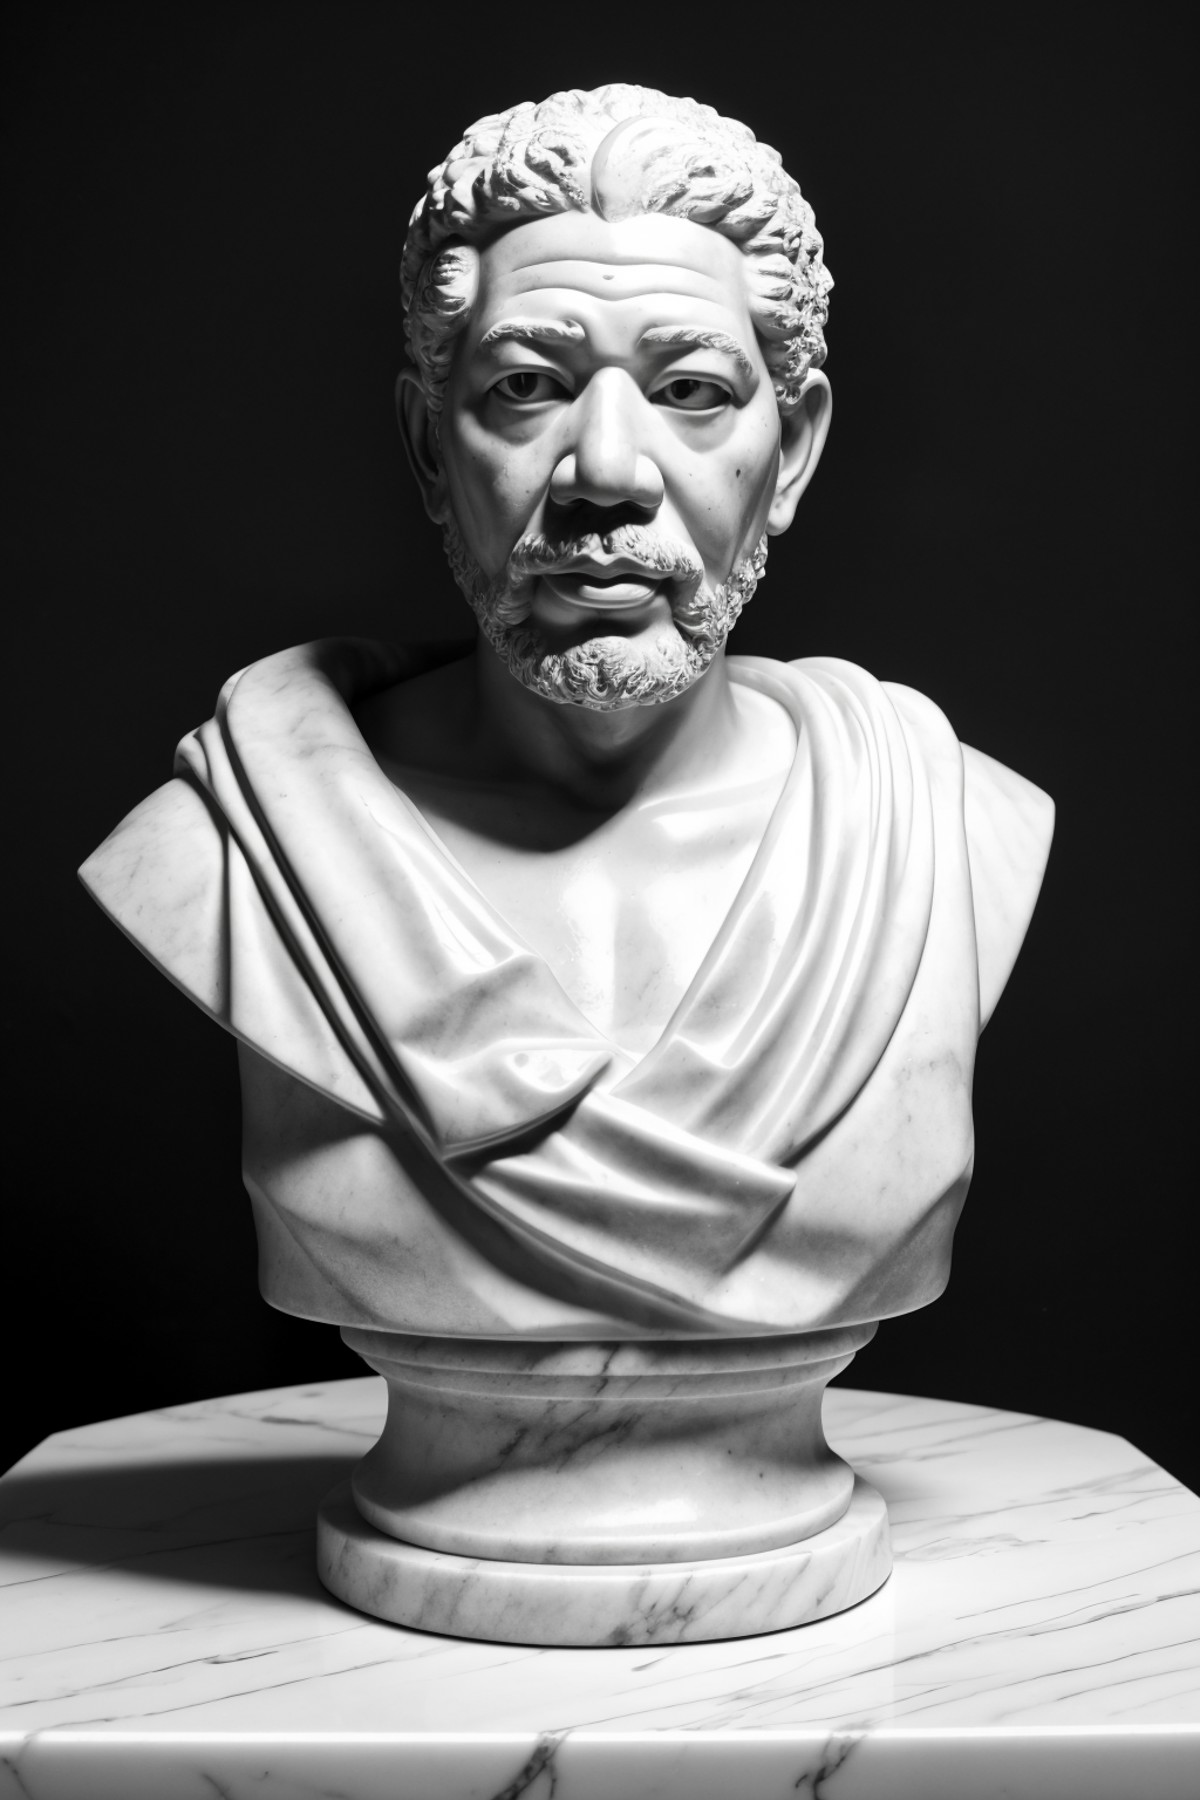 Tempting [Nervous:Vivid Neon Promo:18] "A marble bust of Morgan Freeman as a Roman Emperor",black simple background,  ultr...